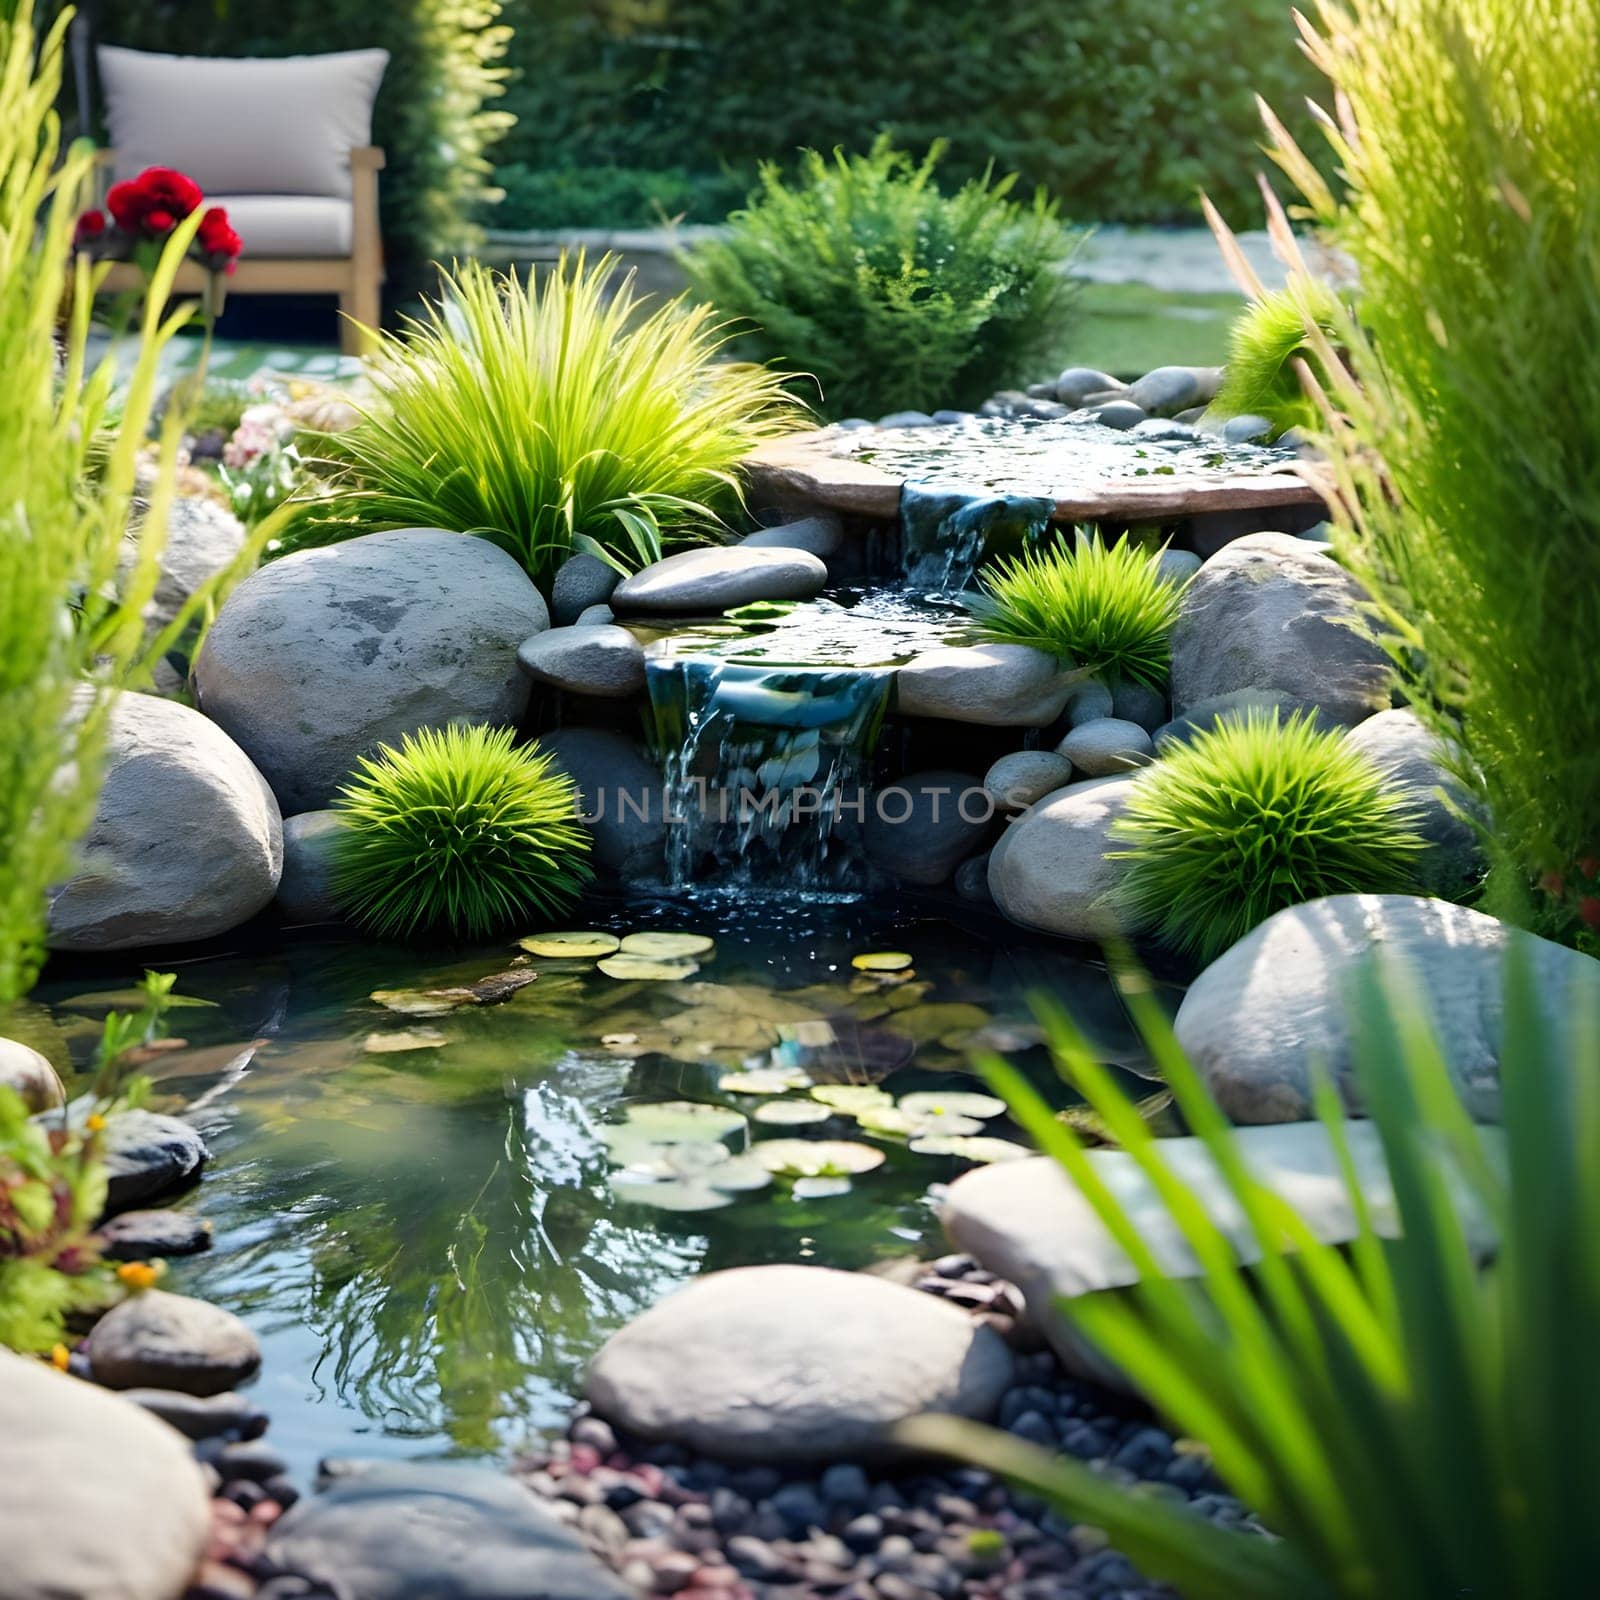 Tranquil Oasis: A Serene Home Garden Landscape by Petrichor